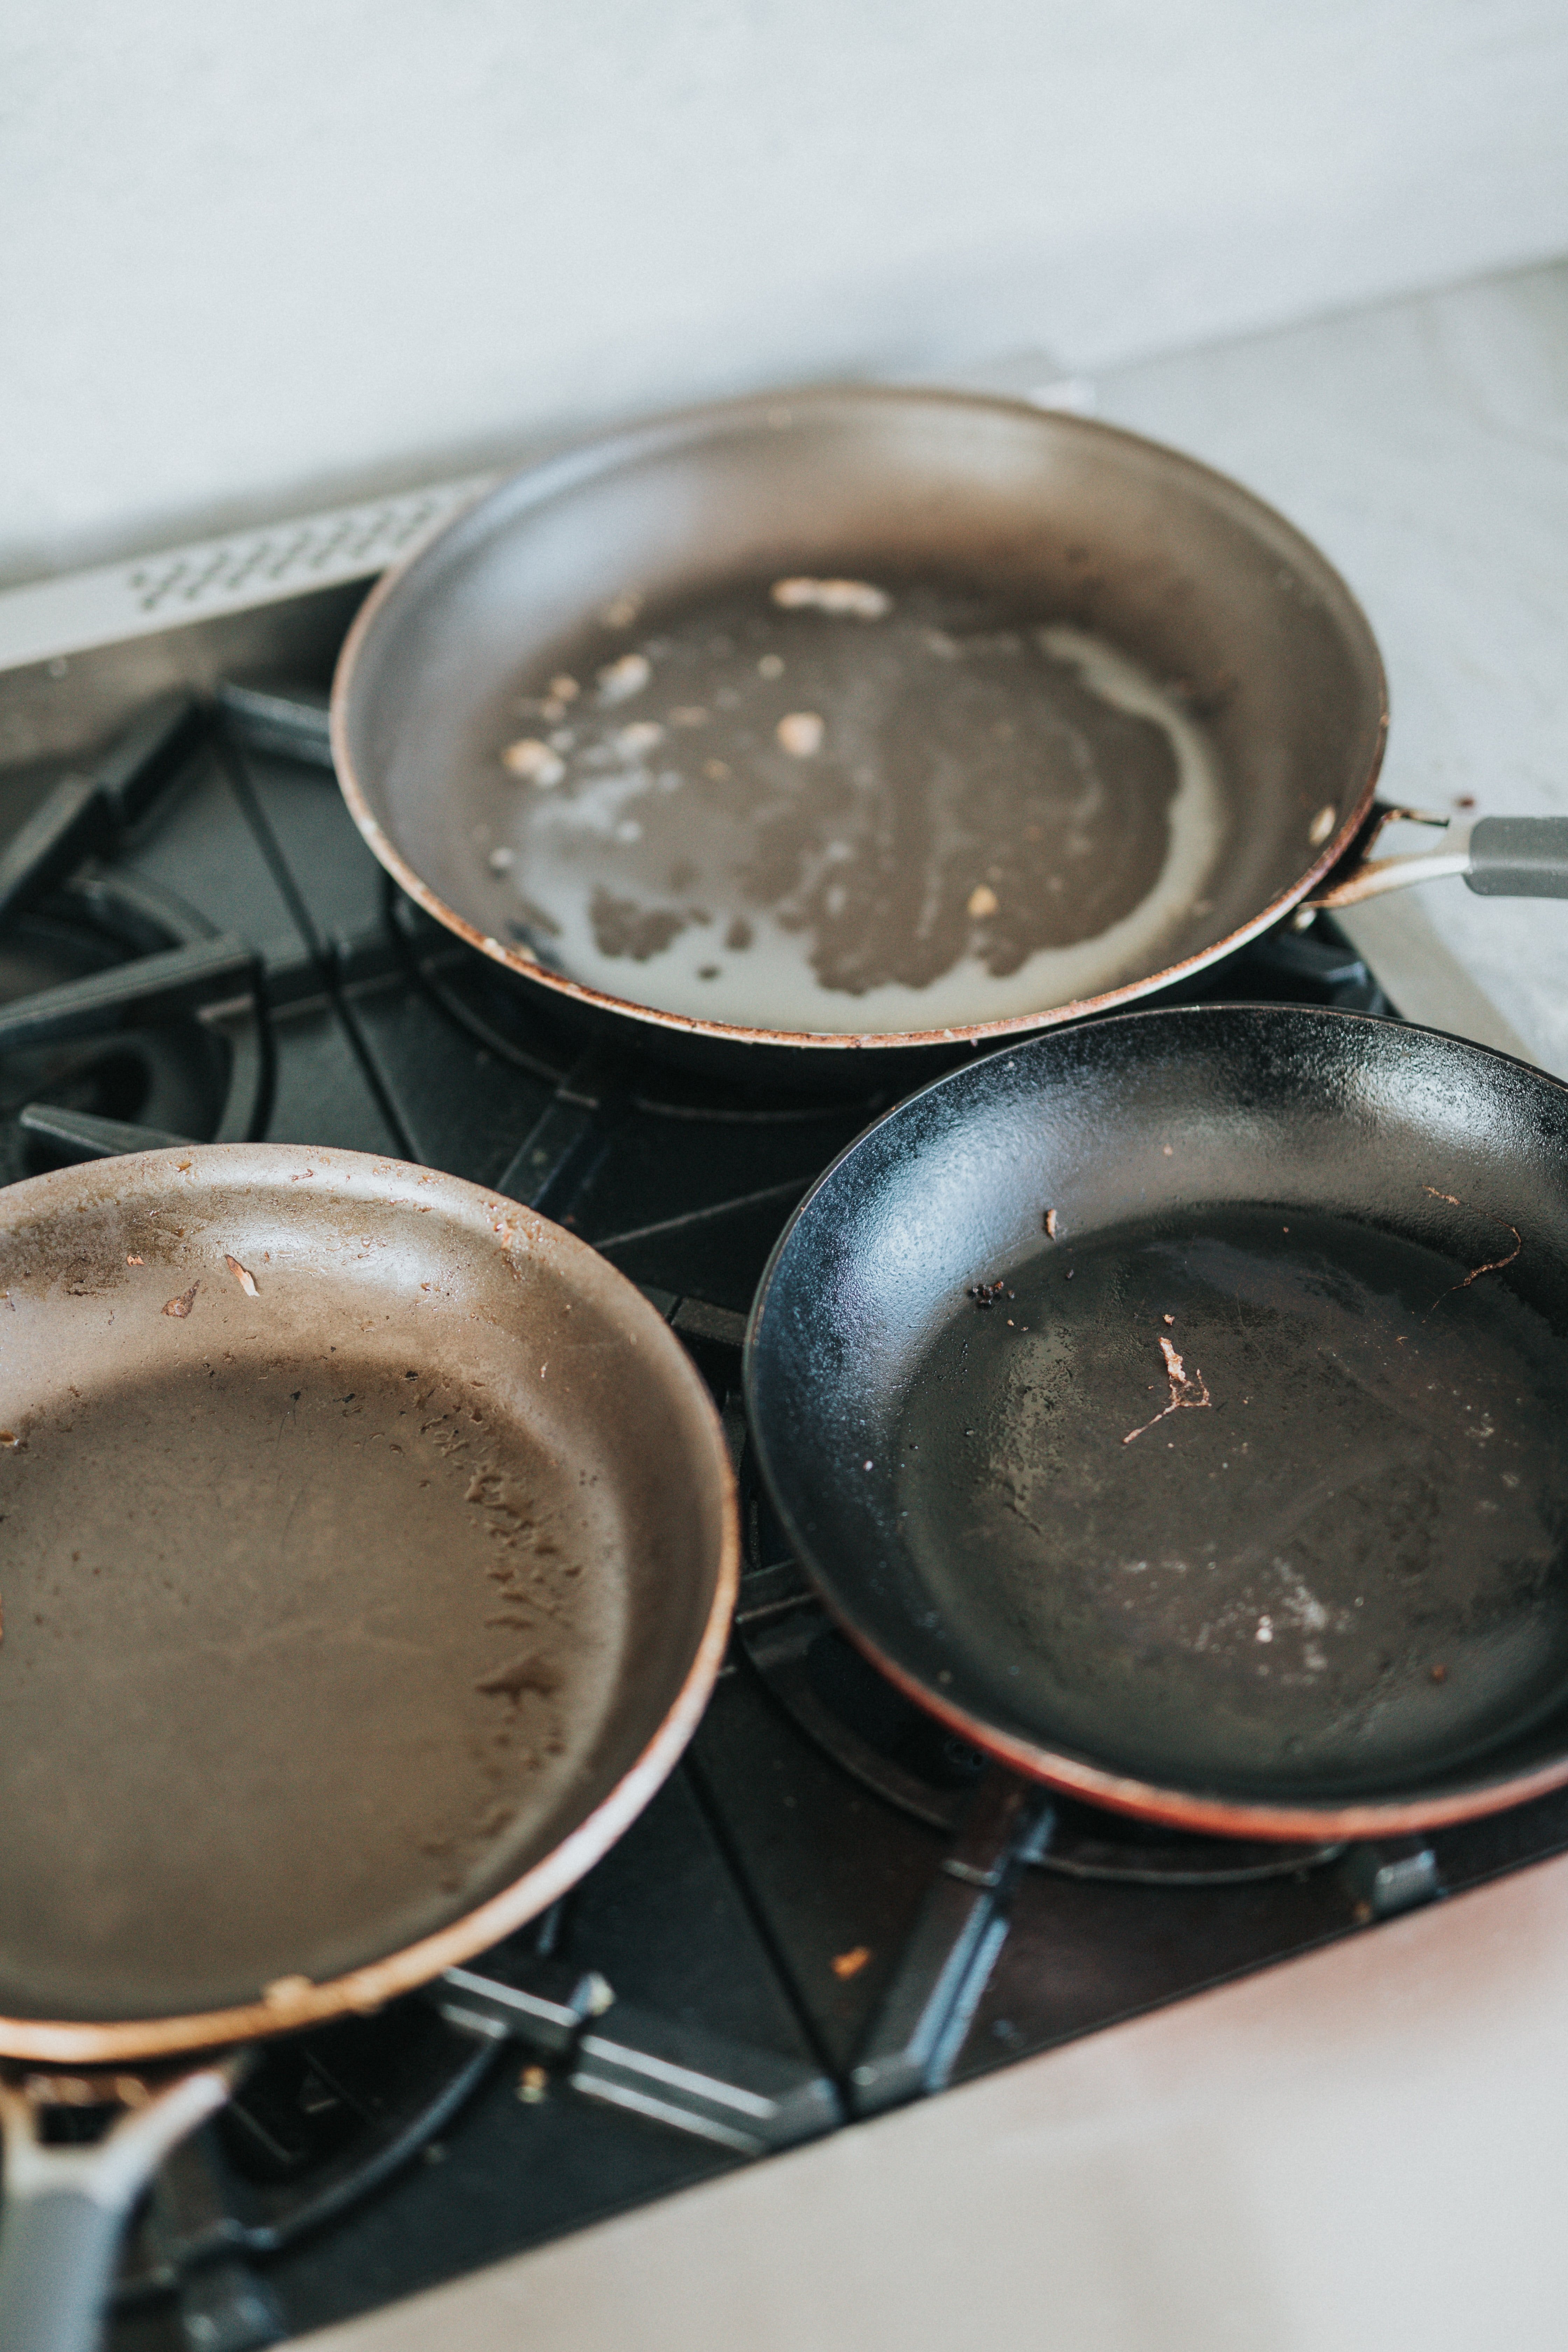 Mr. Kelso saw the dirty pots and discovered what Justin had done. | Source: Unsplash